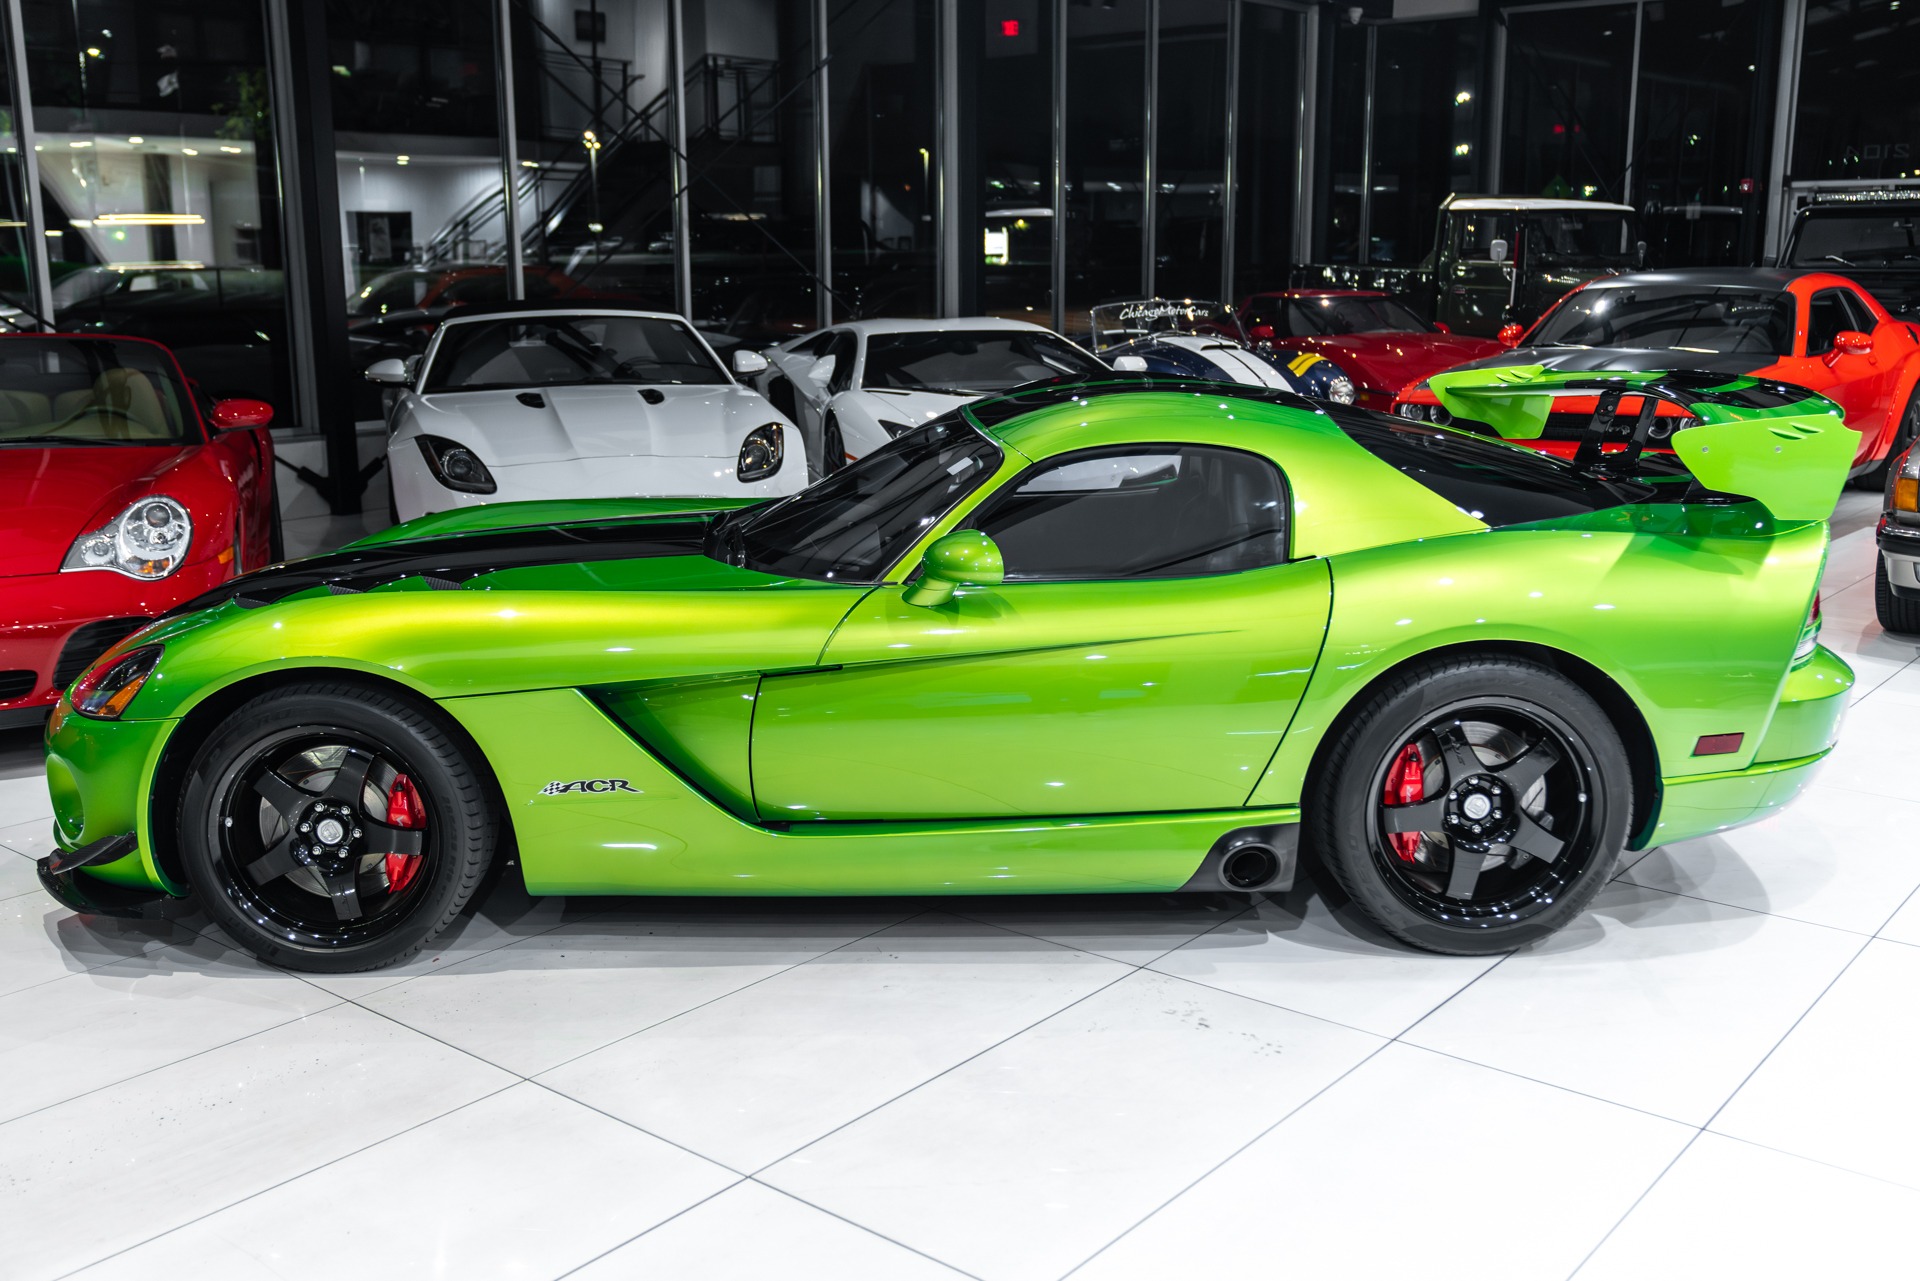 Used-2010-Dodge-Viper-SRT-10-ACR-Coupe-6-Speed-Manual-Snakeskin-Green-Pearl-LOW-Miles-RARE